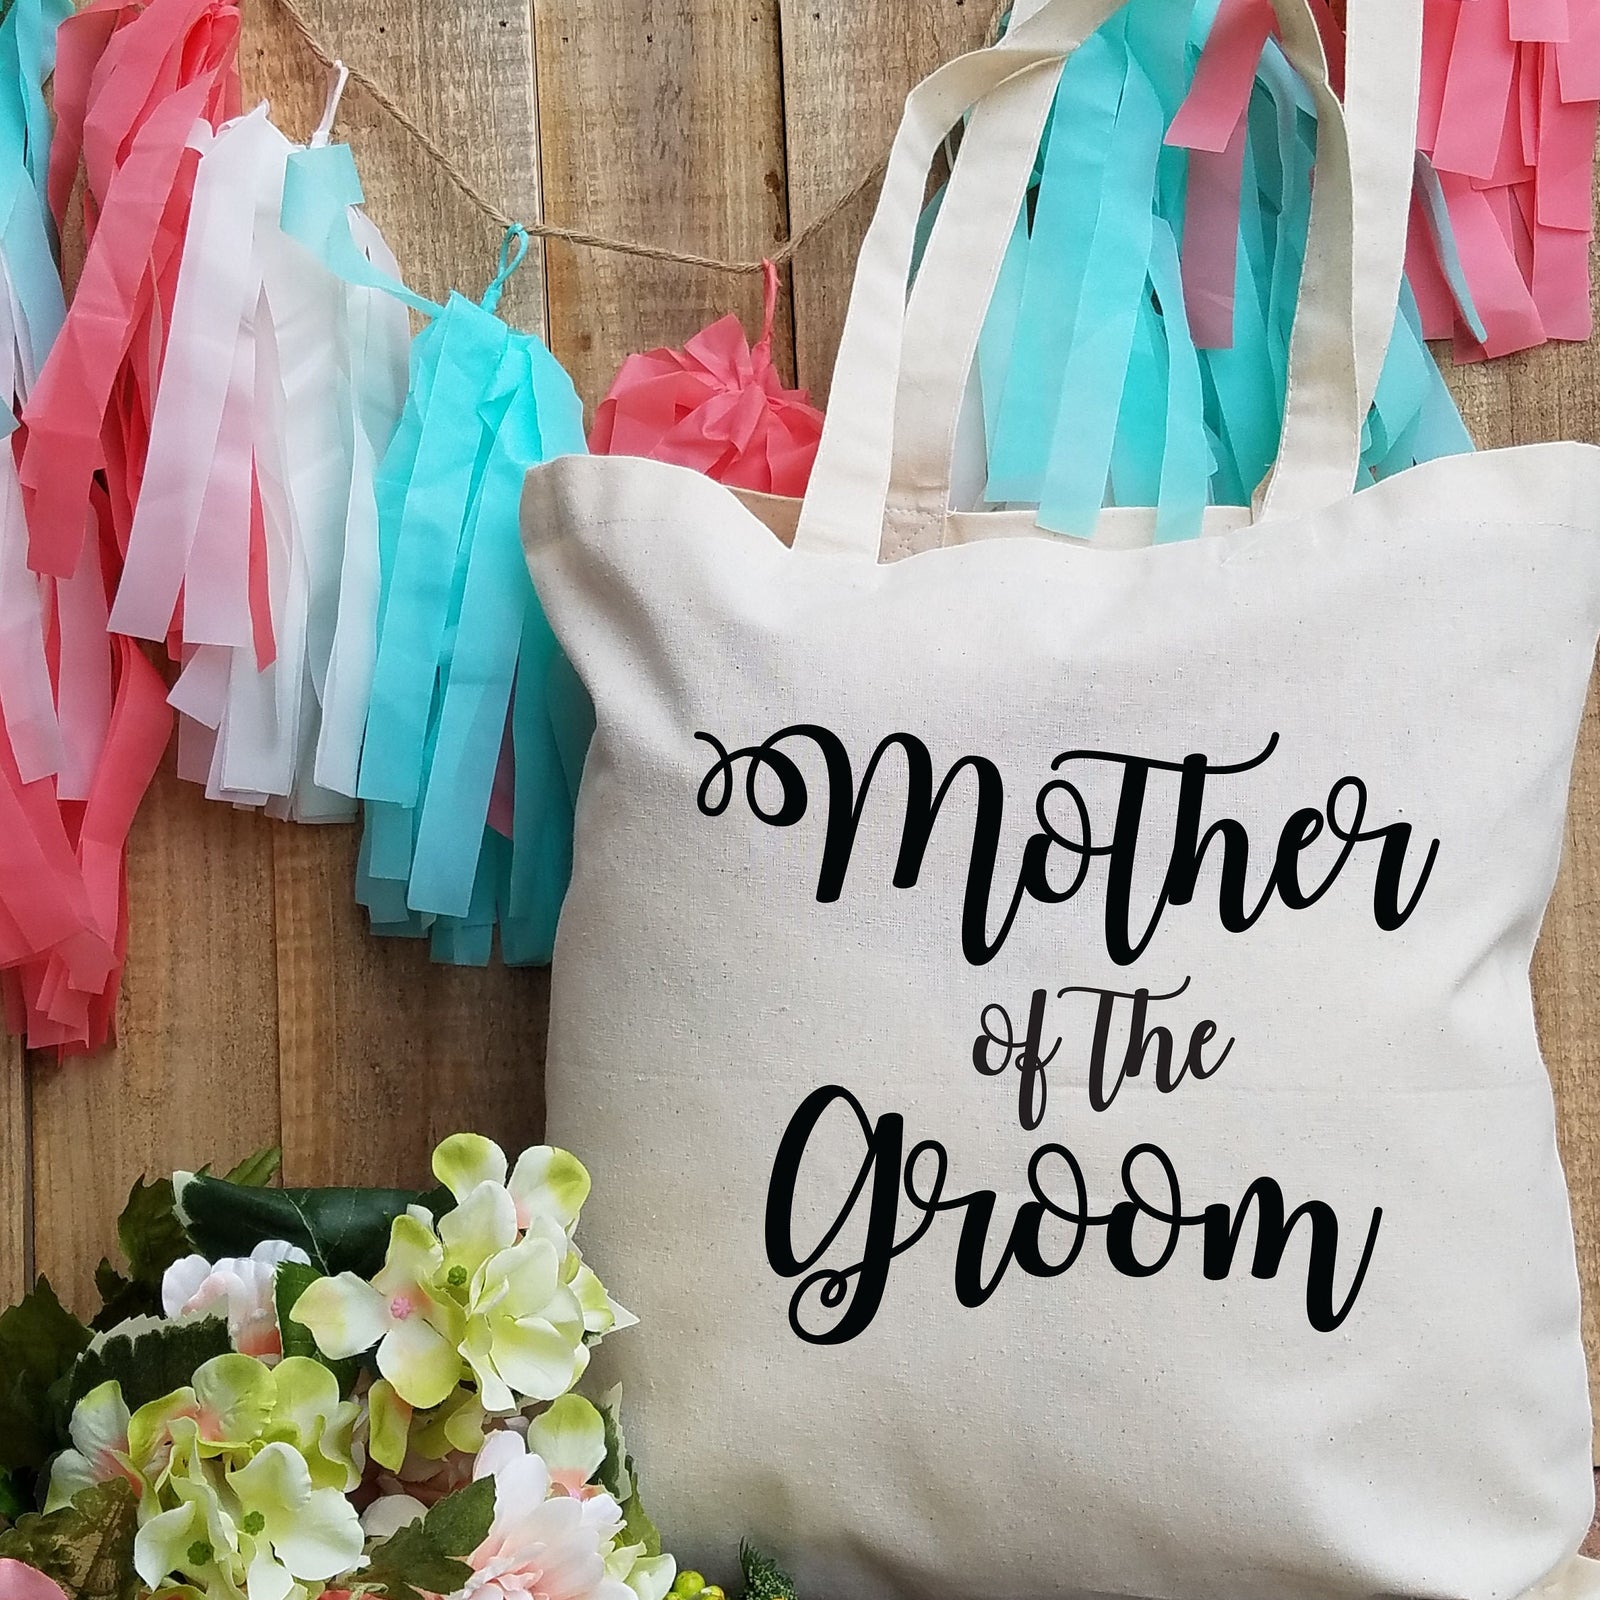 Mother of the Bride Tote - Mother of the Groom Tote - Wedding Party Gift